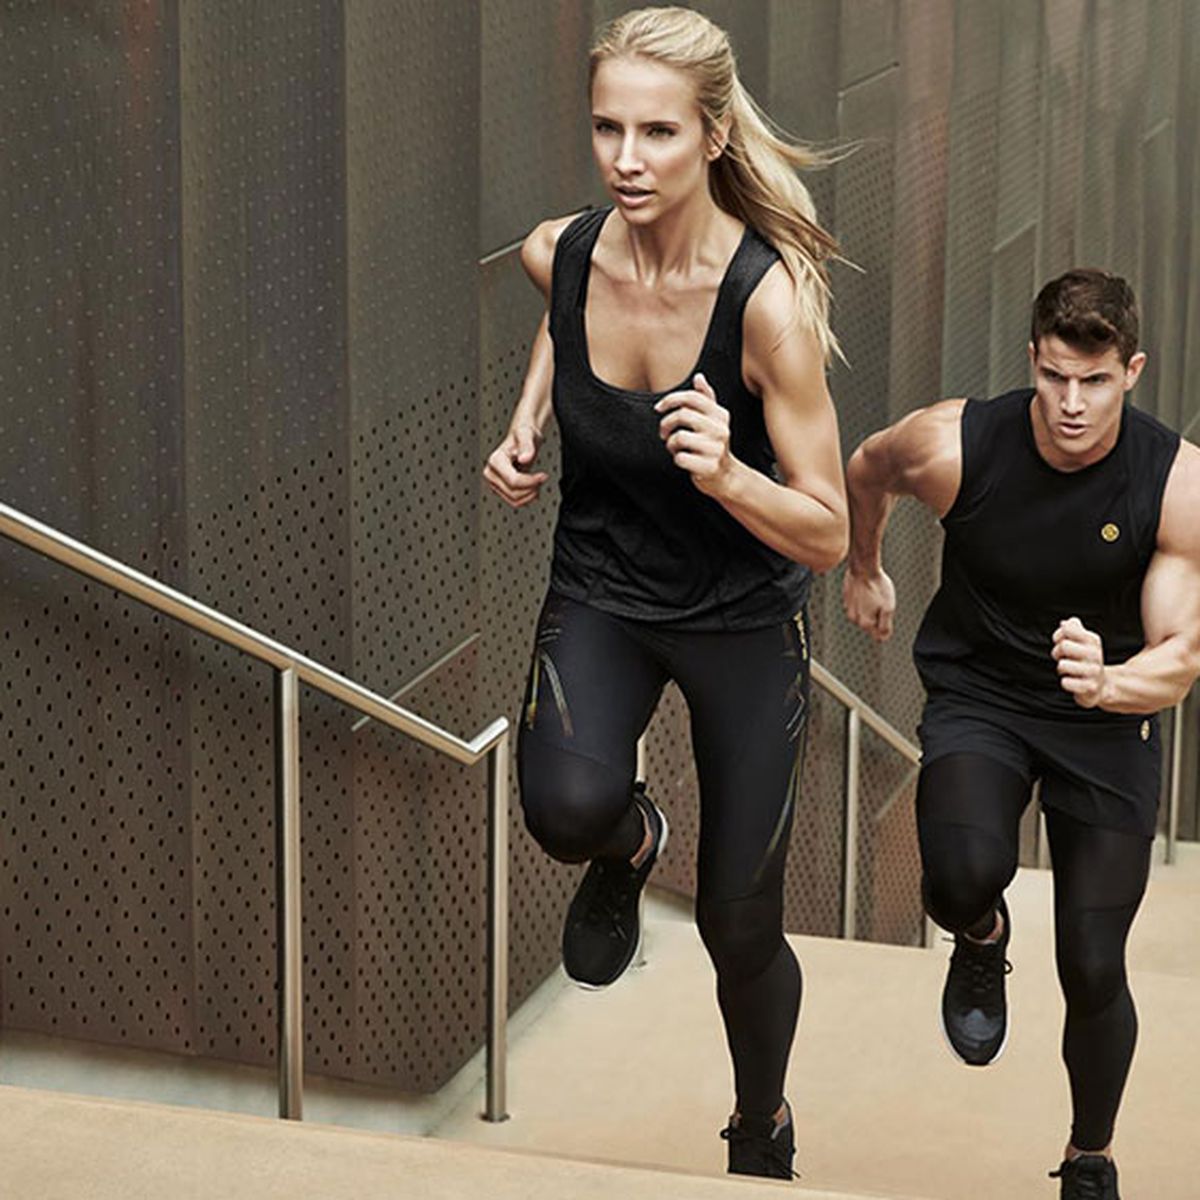 Does your expensive compression wear really work? 9Coach